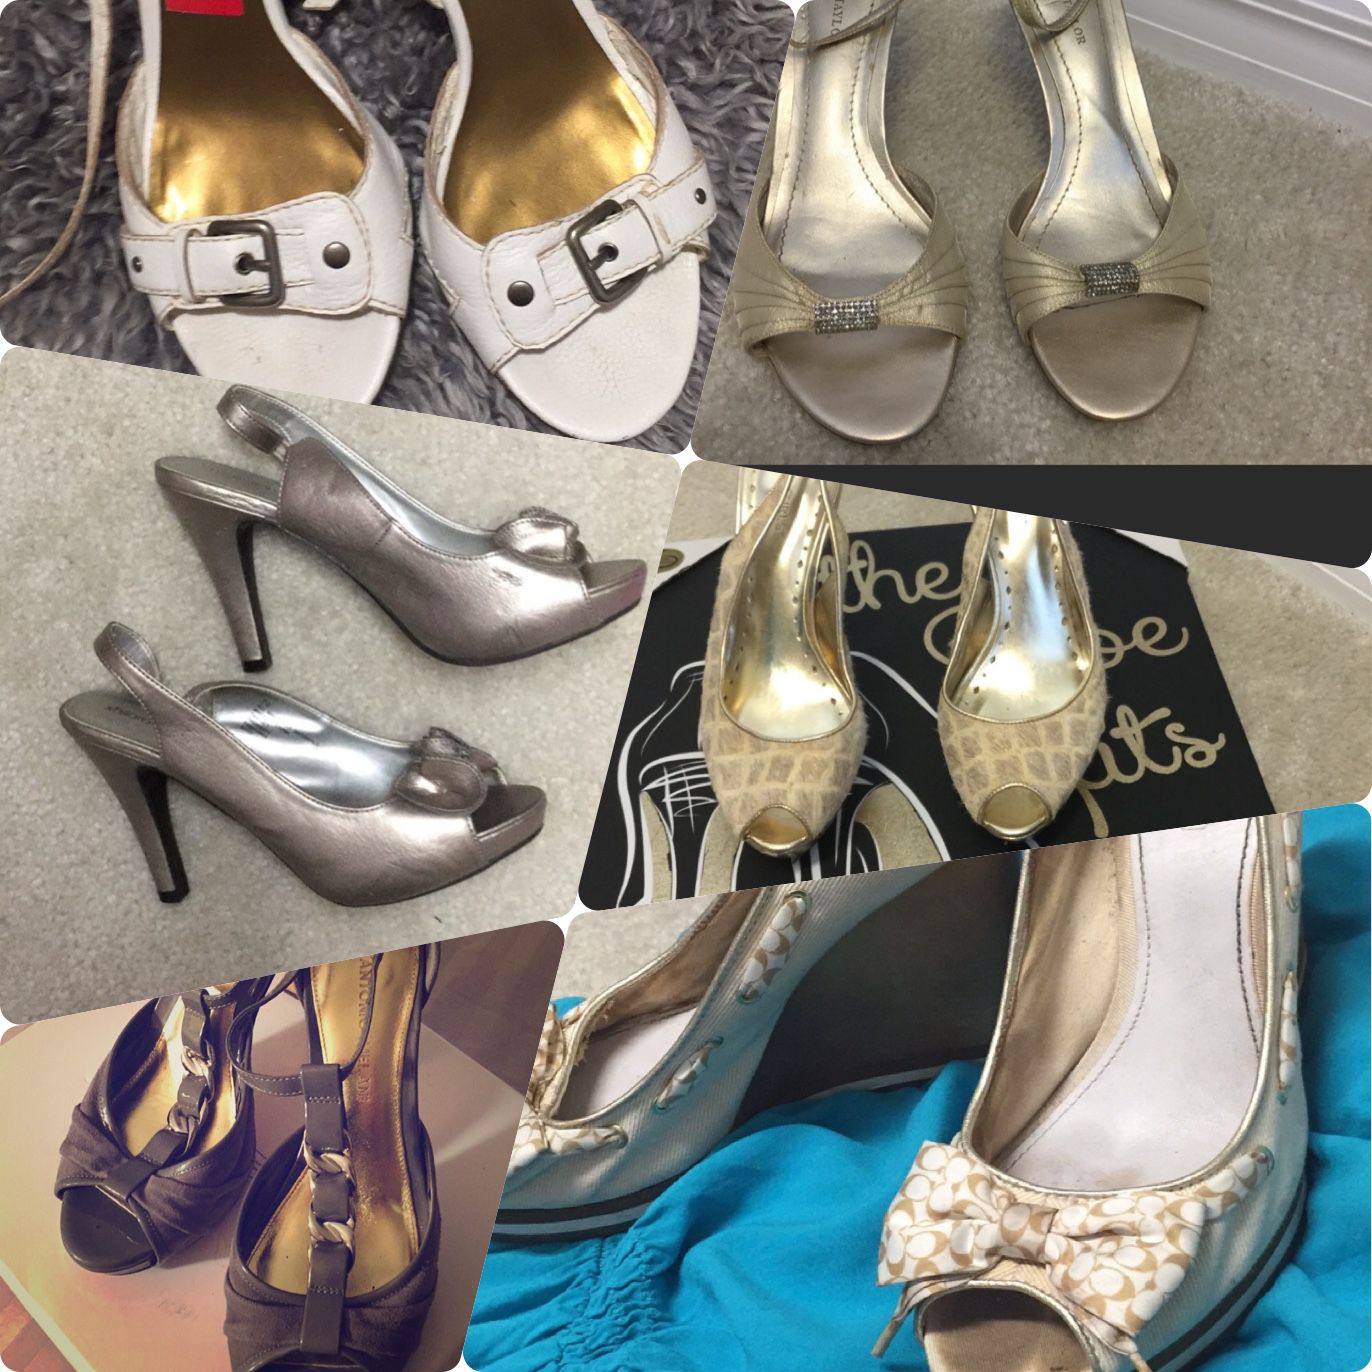 Six pairs of size 8 designer women’s shoes